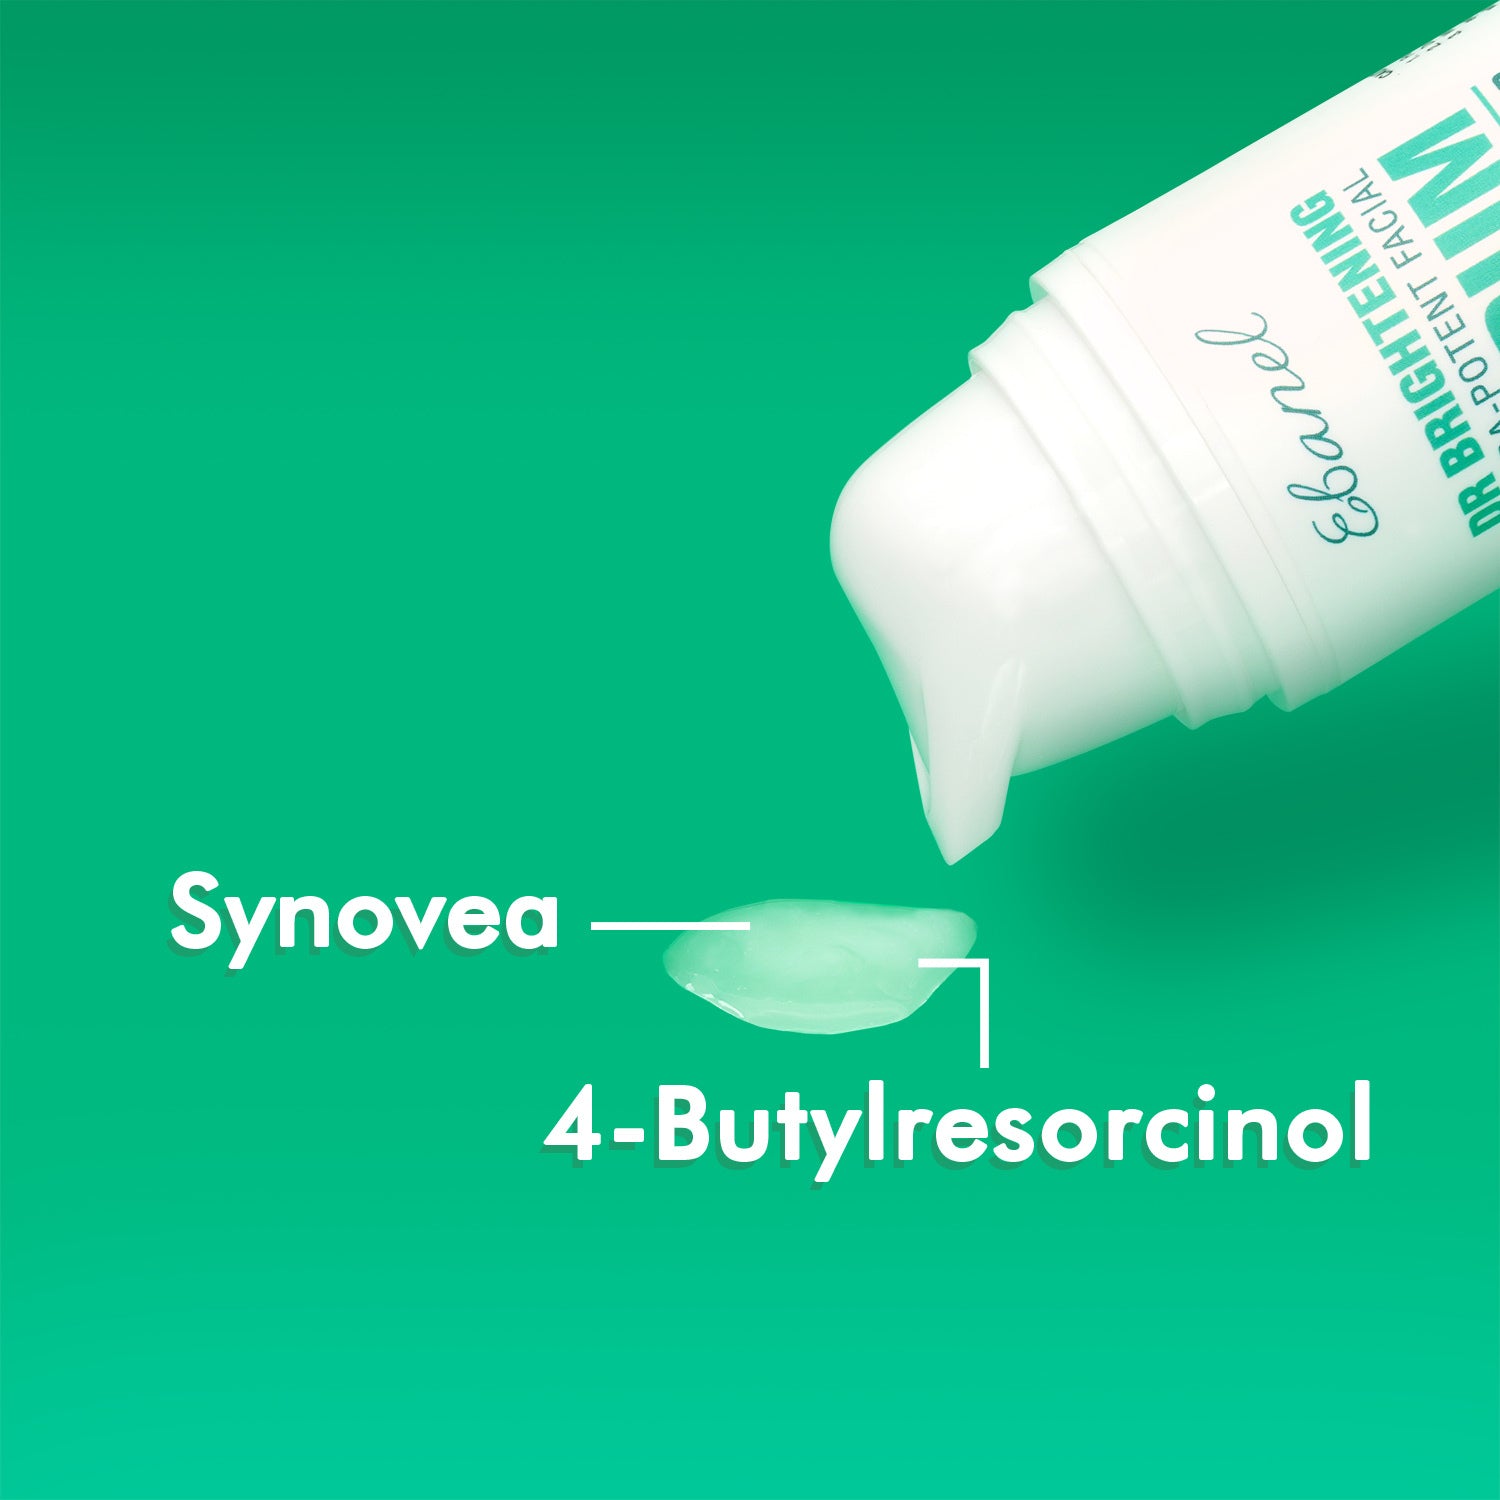 Dr Brightening Ultra-Potent Facial Serum with synovea and 4-butylresorcinol